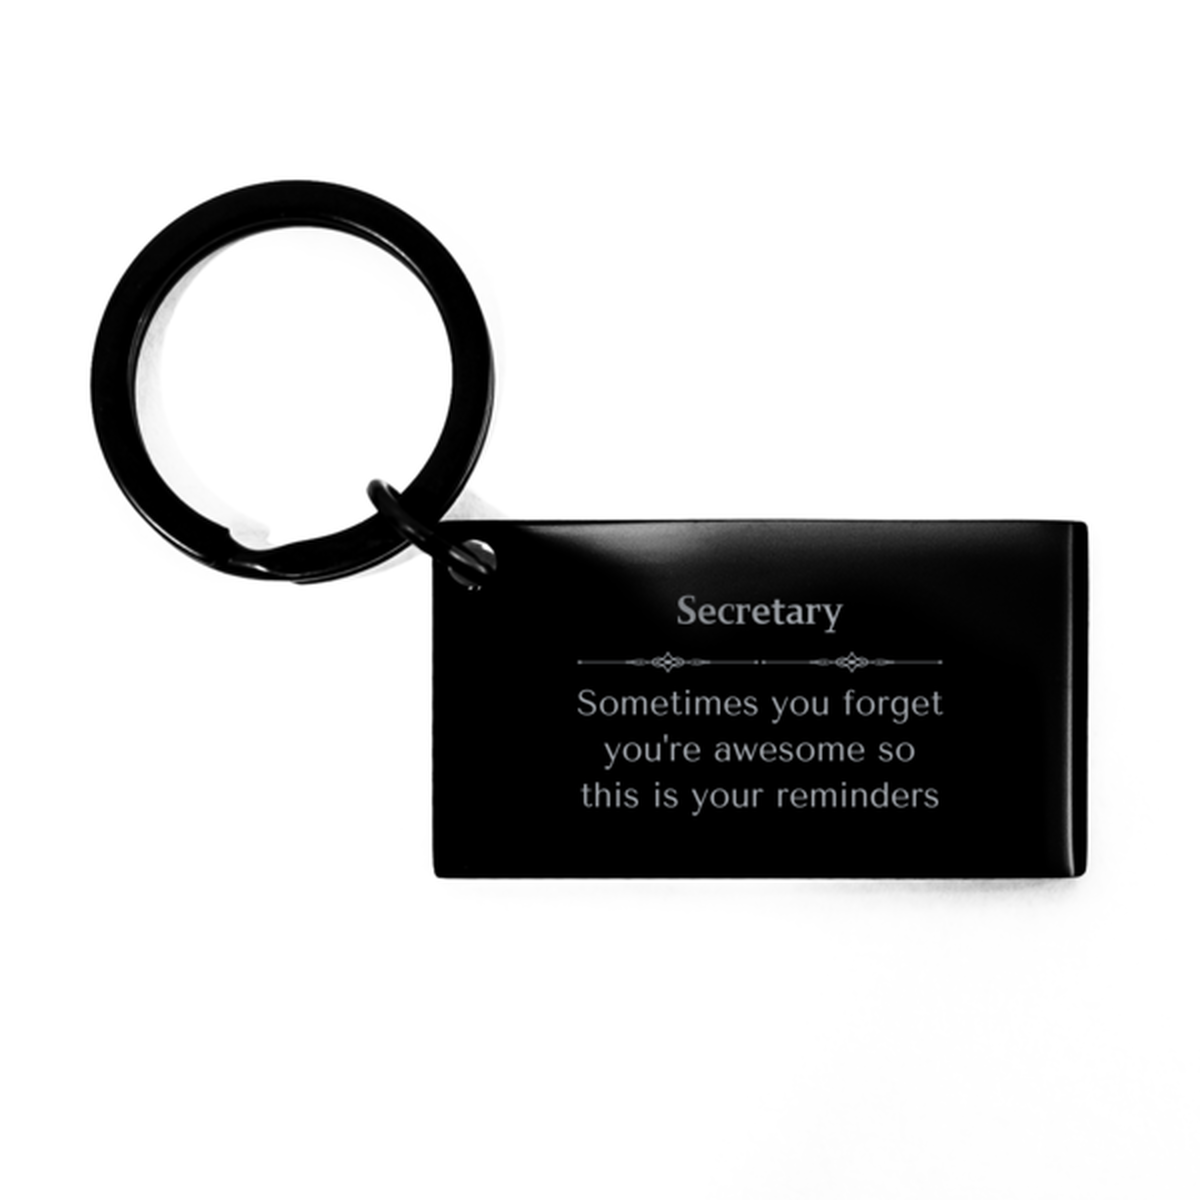 Sentimental Secretary Keychain, Umpire Sometimes you forget you're awesome so this is your reminders, Graduation Christmas Birthday Gifts for Secretary, Men, Women, Coworkers